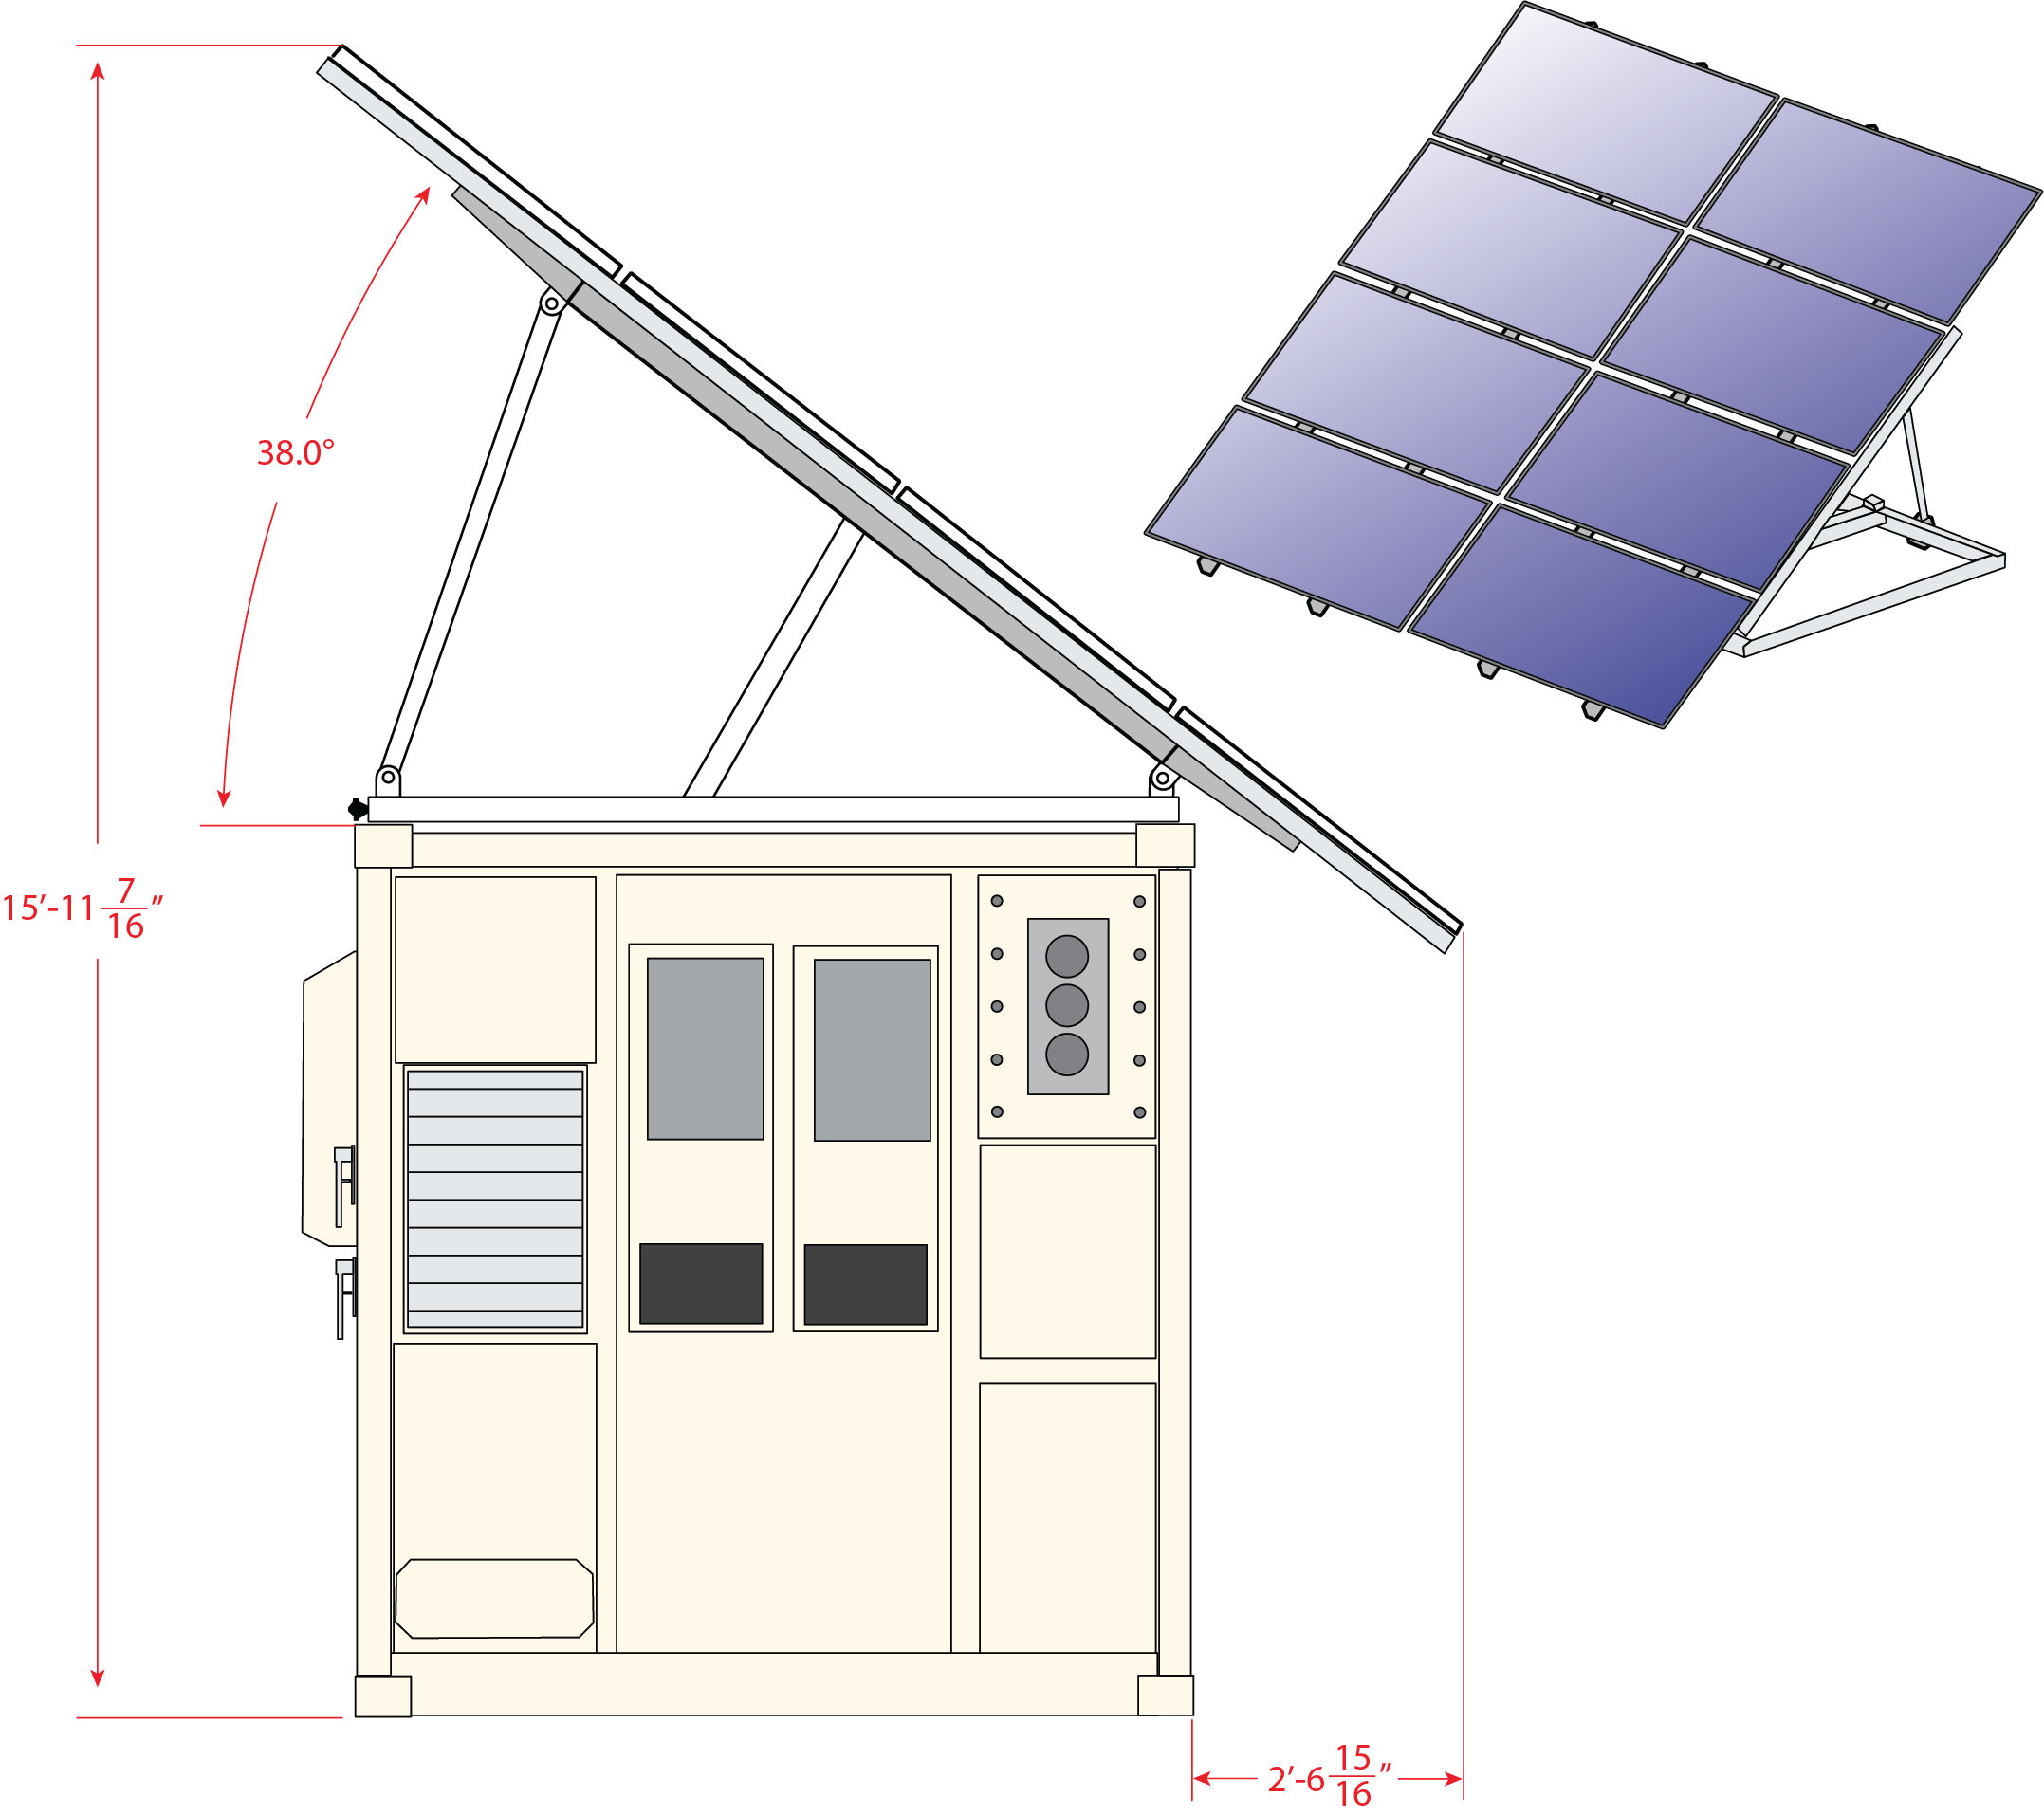 hcie energy side view solar option